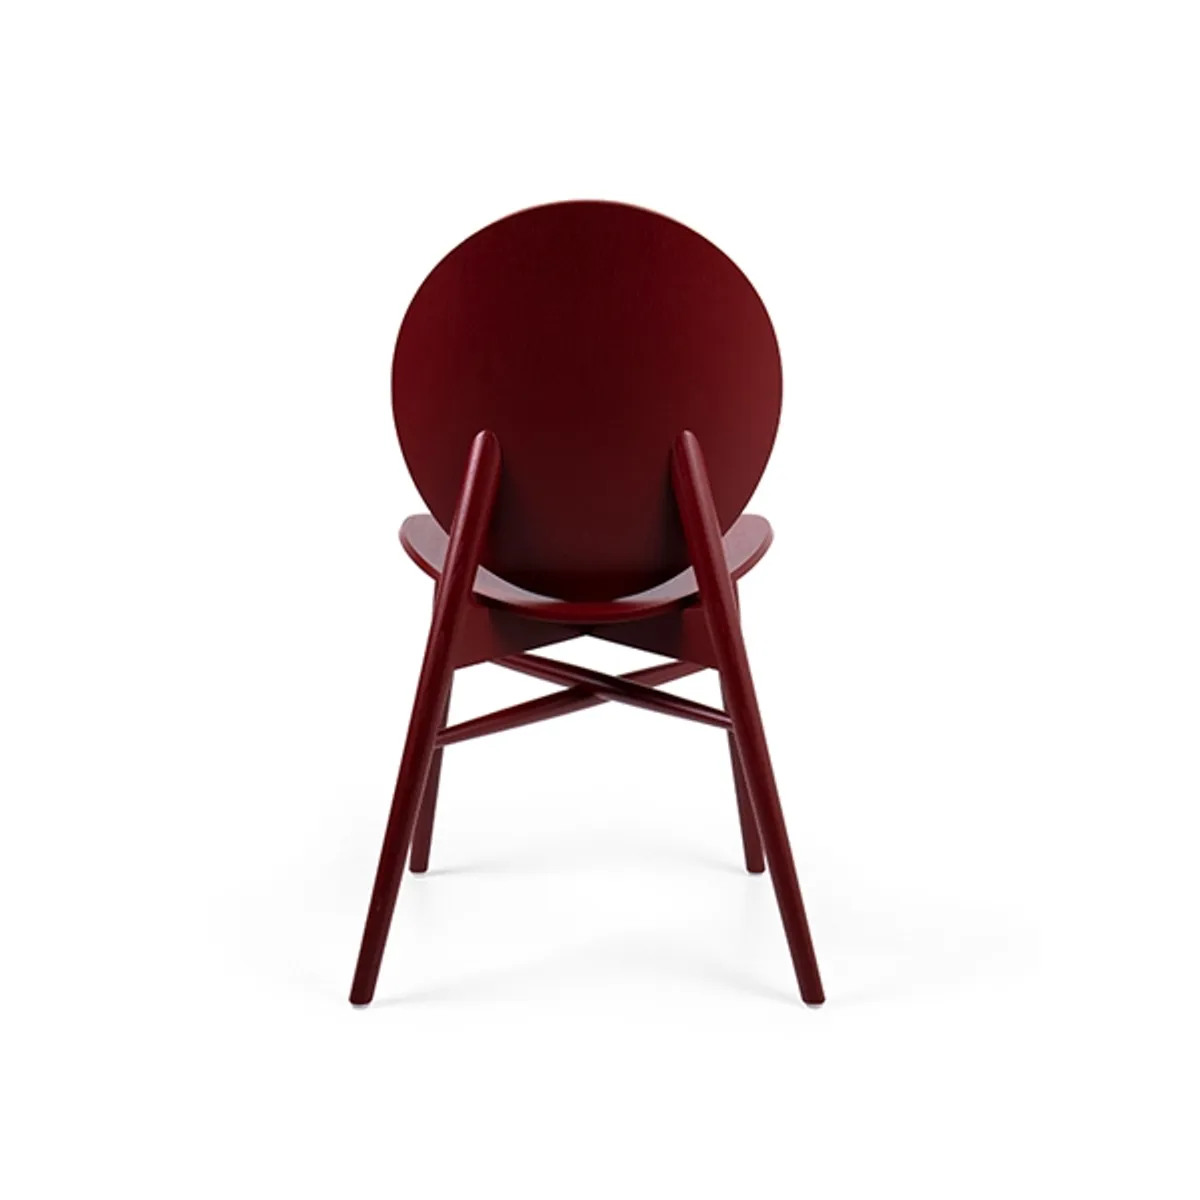 Eder wood chair Inside Out Contracts2